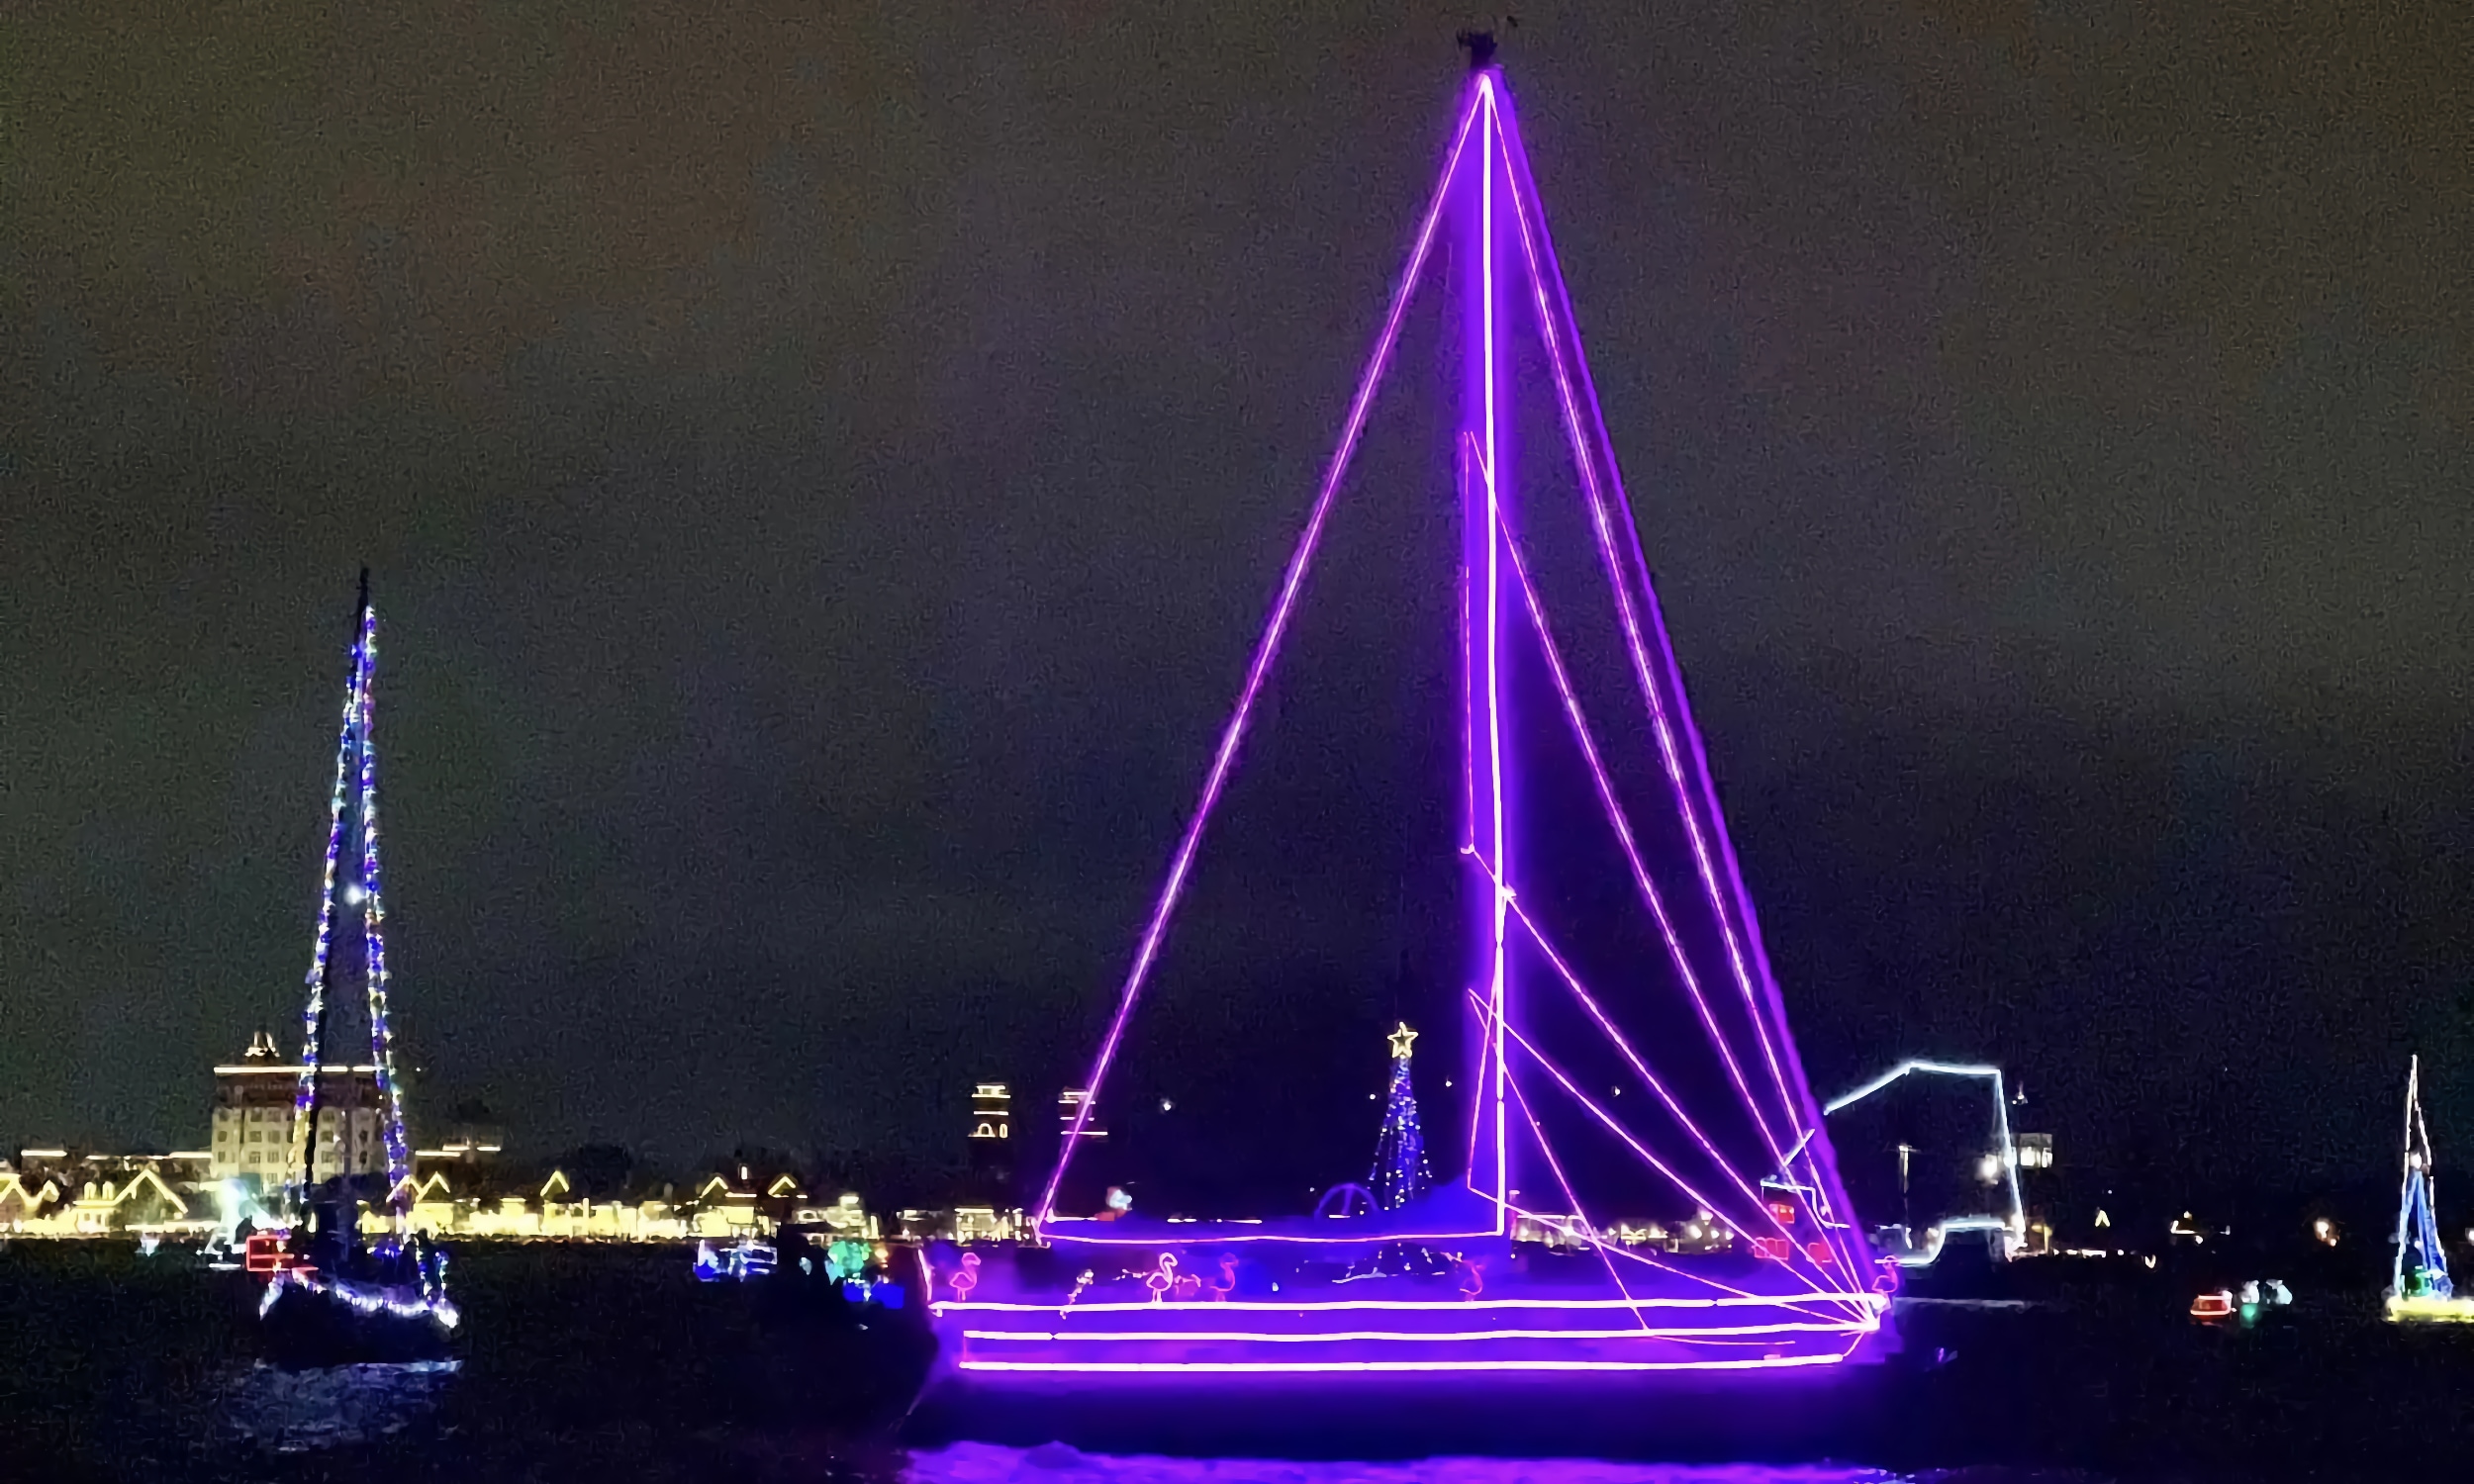 Sailboats, light with lights for St. Augustine's Regatta of Lights on the Bayfront